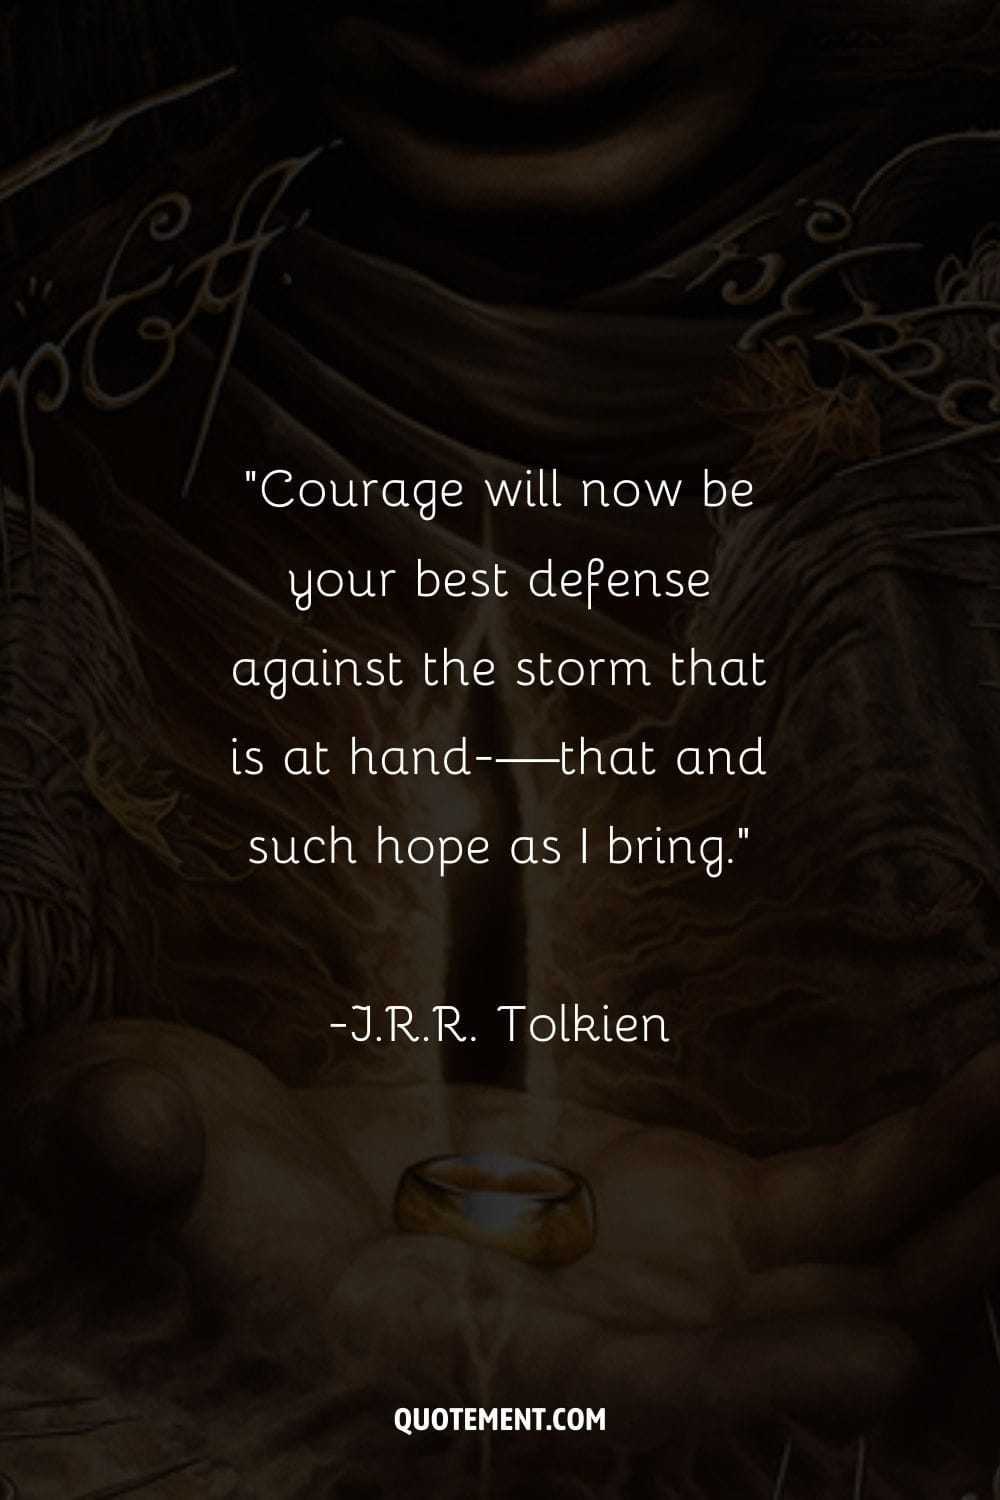 Courage will now be your best defense against the storm that is at hand-—that and such hope as I bring